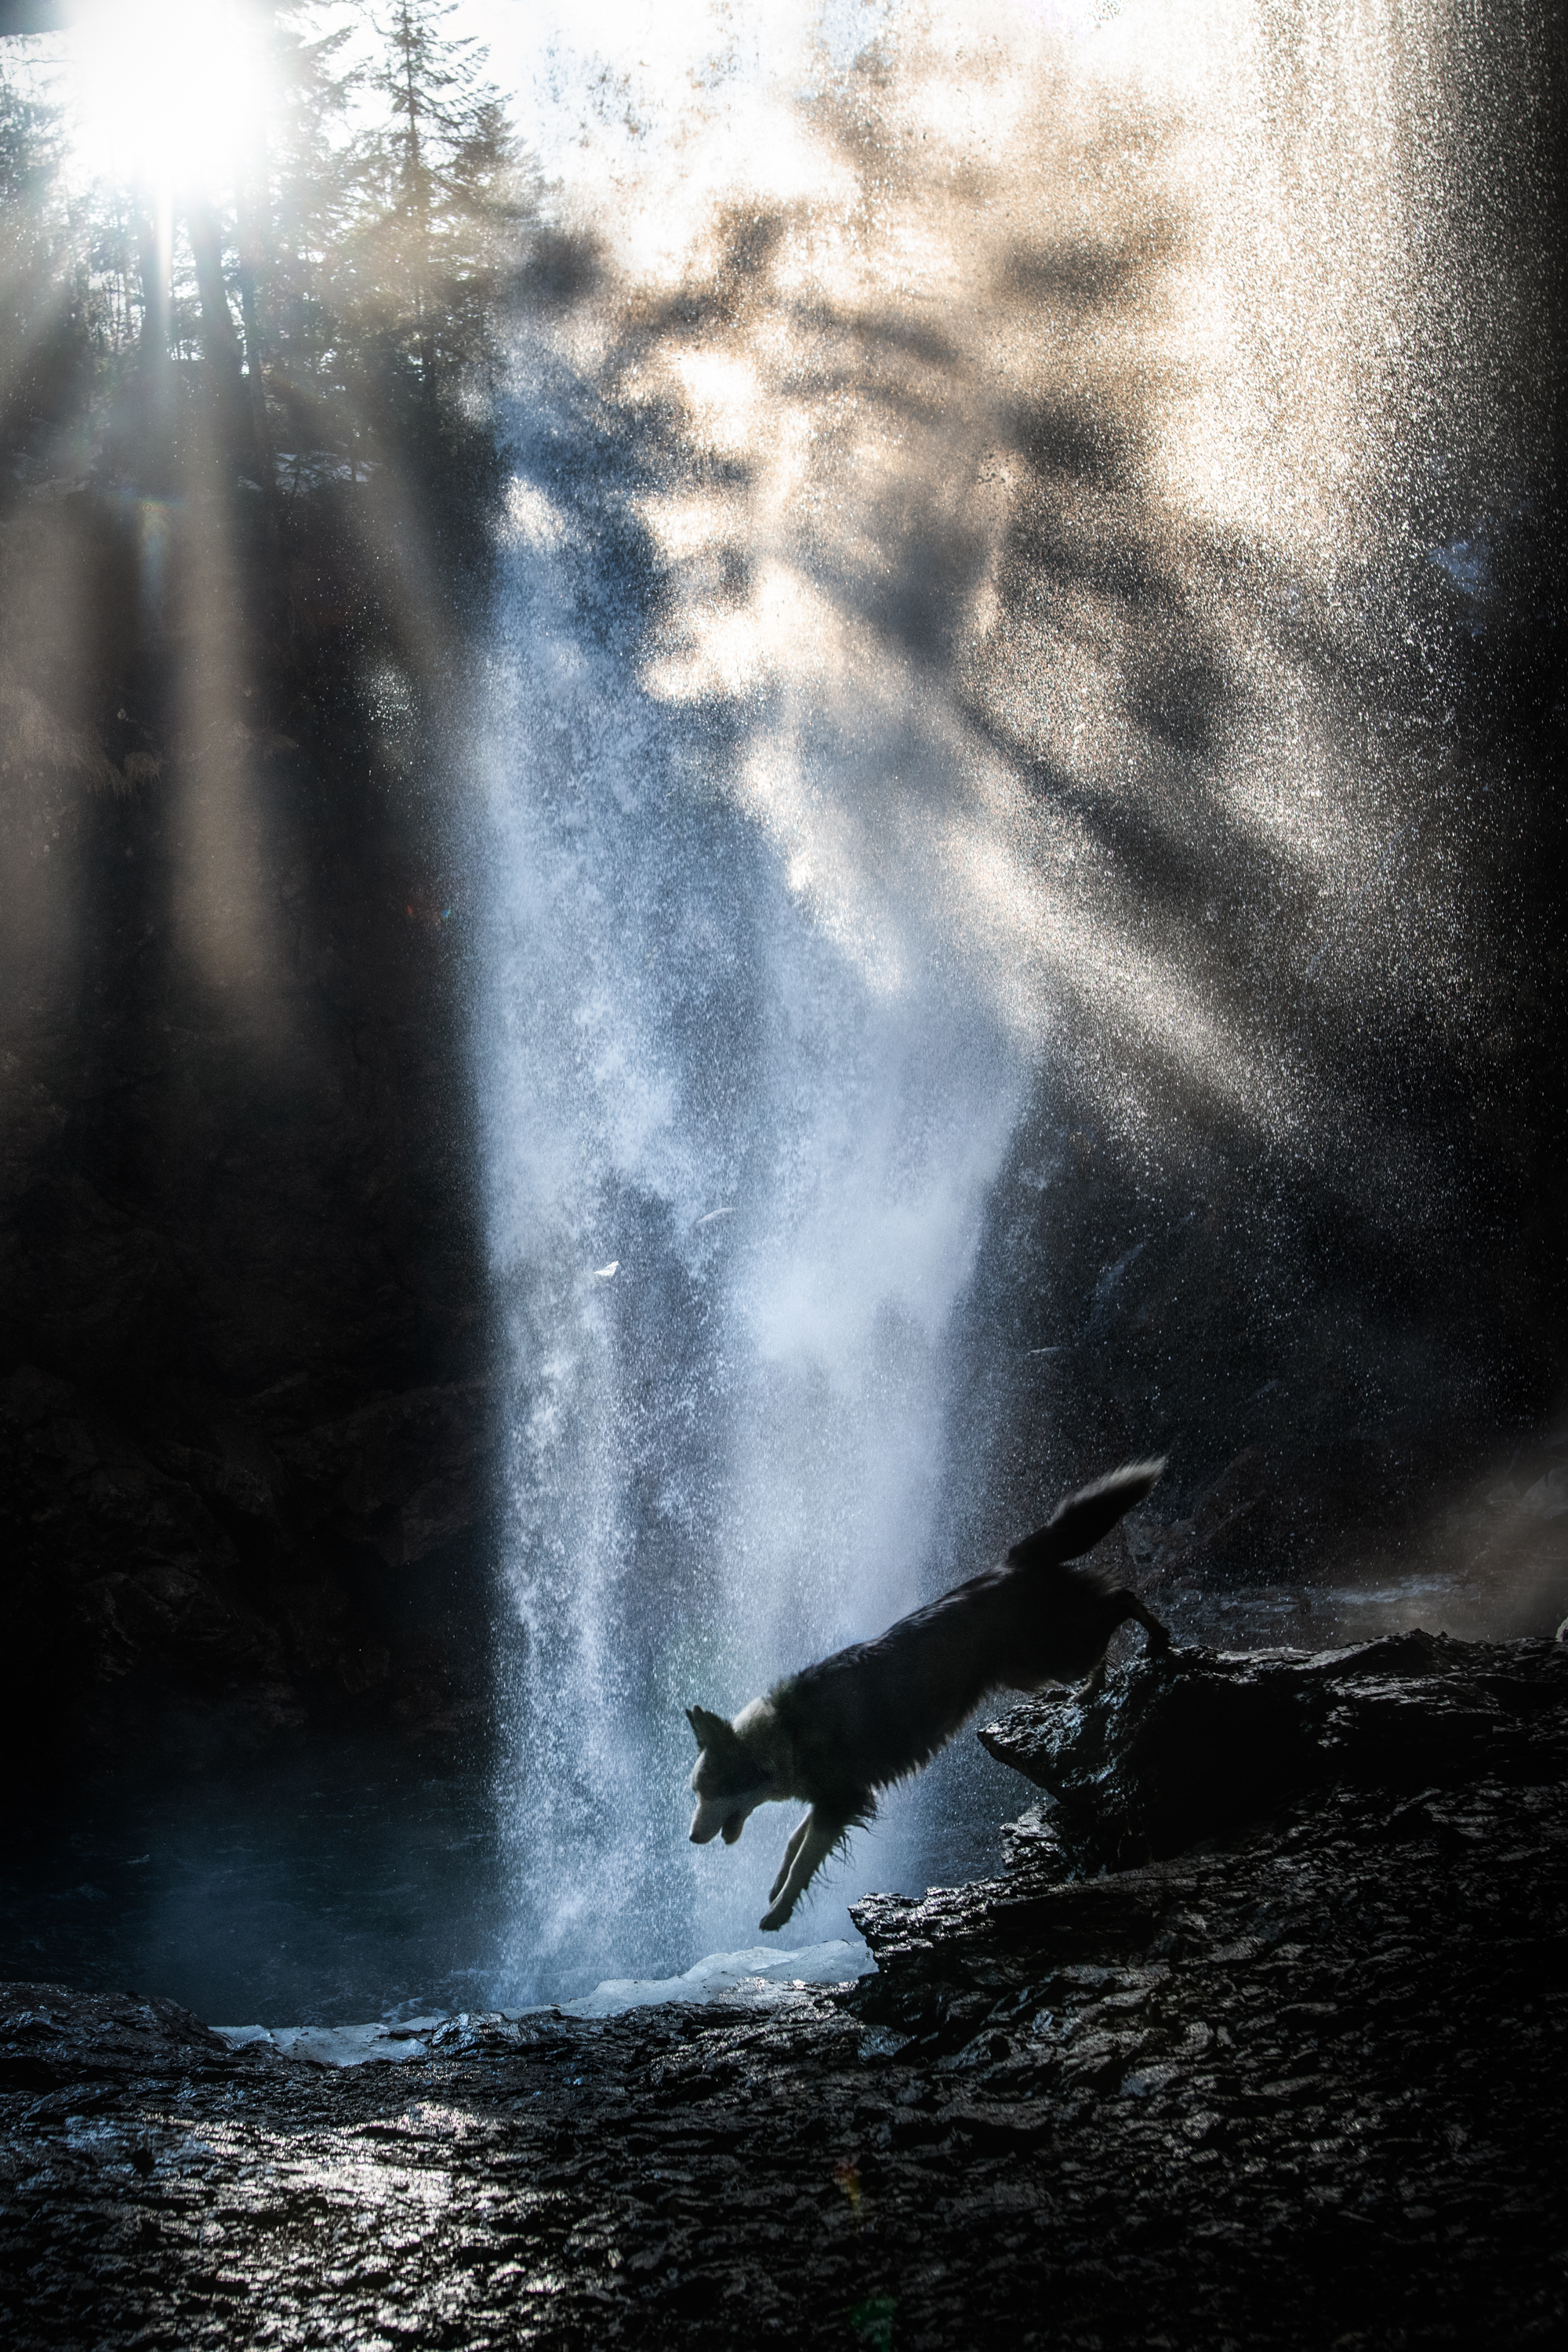 A dog jumps in front of a waterfall.